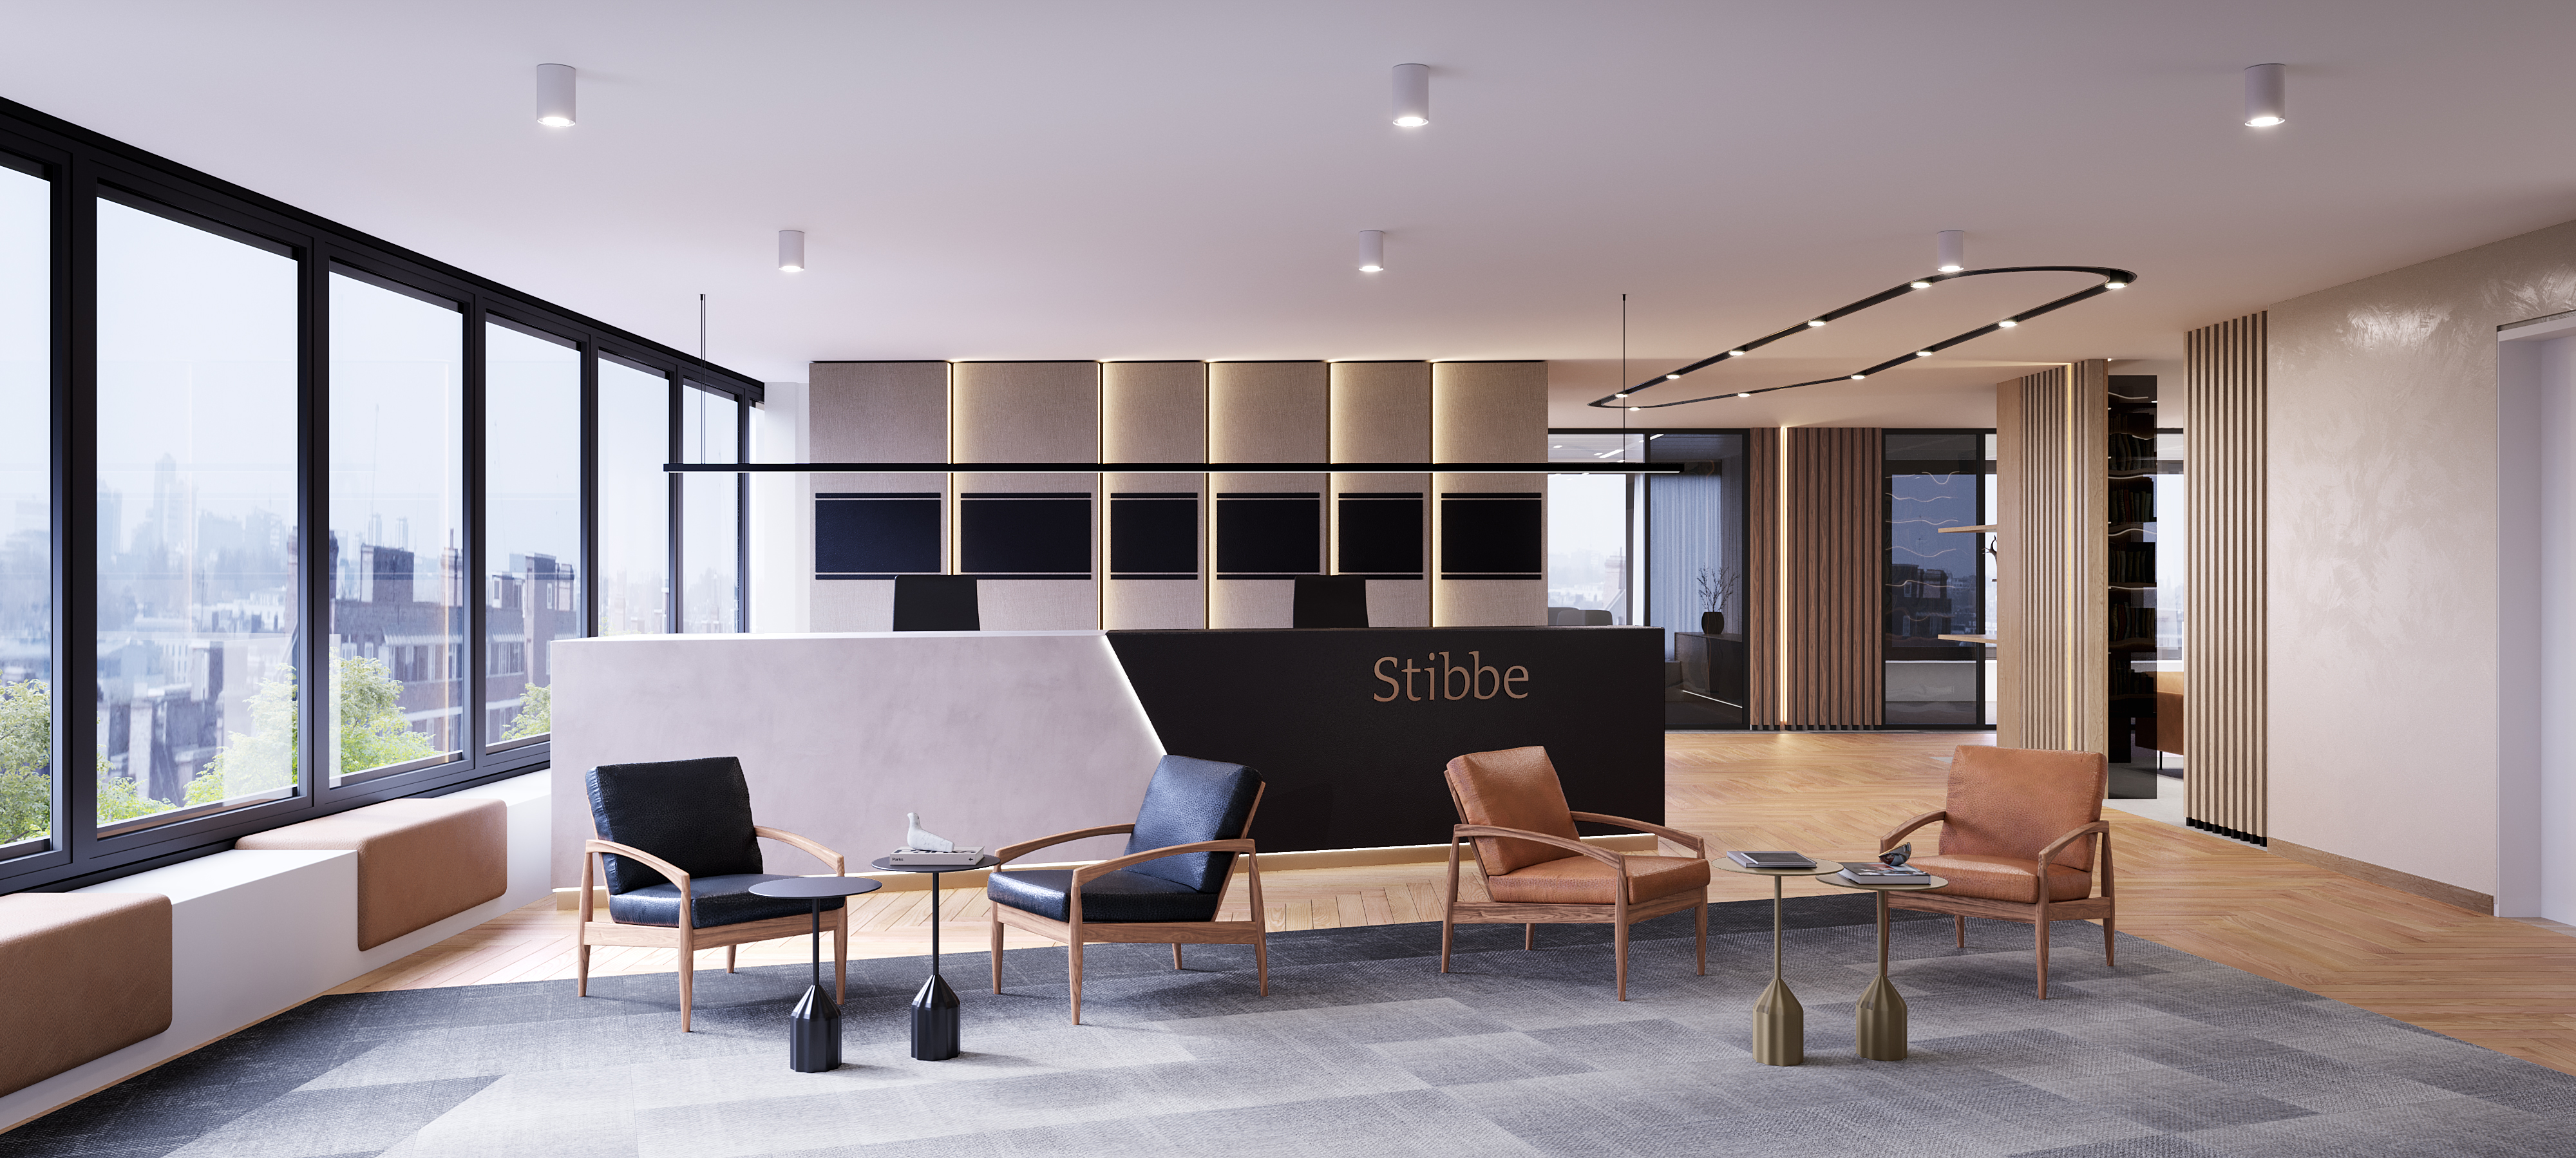 Stibbe reception area in the Emerald building situated in the Cloche d'Or district in Luxembourg